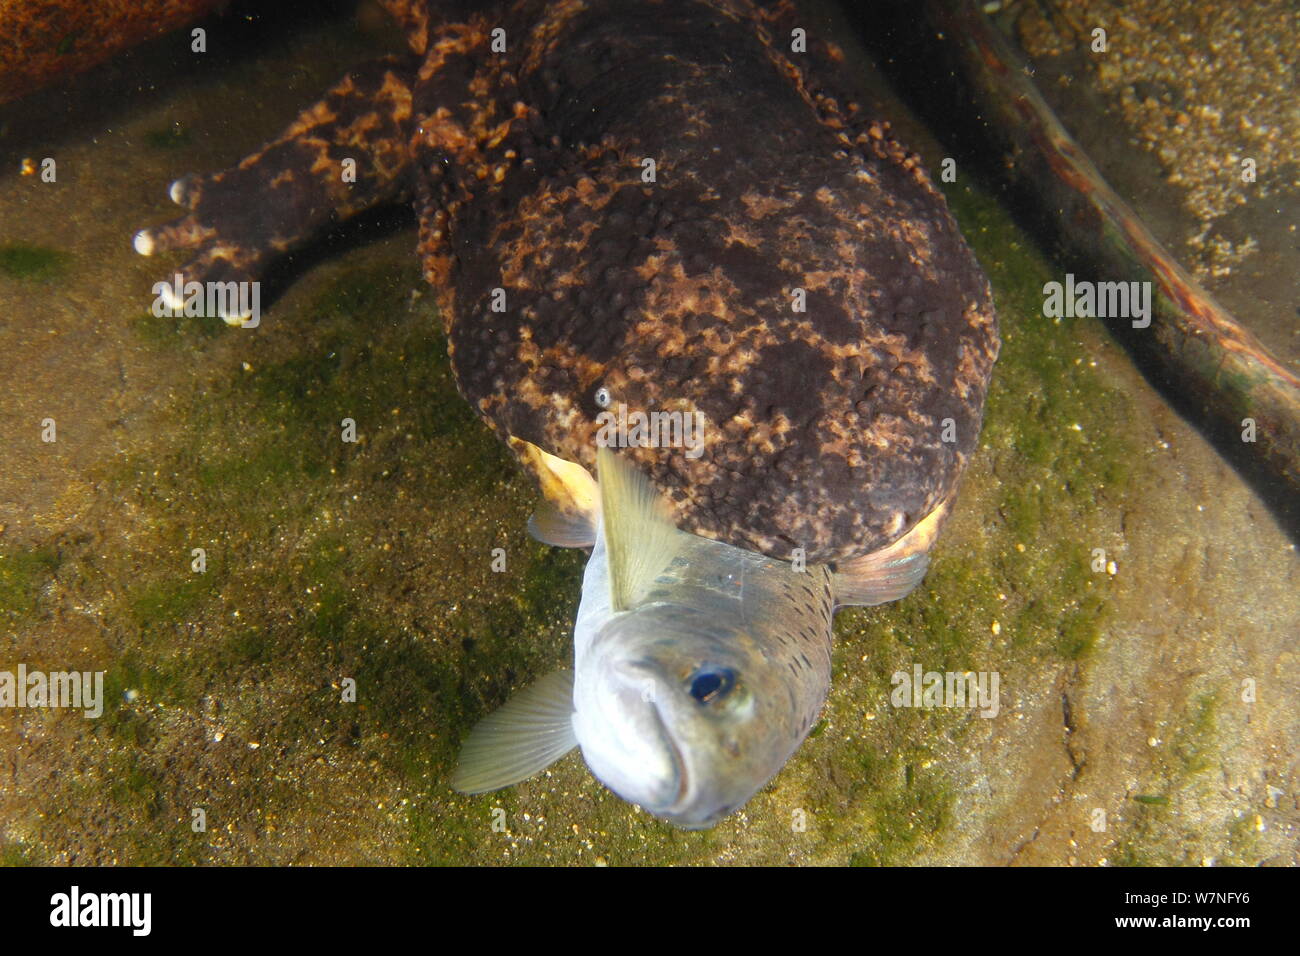 Japanese giant salamander (Andrias japonicus) with Masu salmon (Oncorhynchus) prey in its mouth, Japan, August Stock Photo